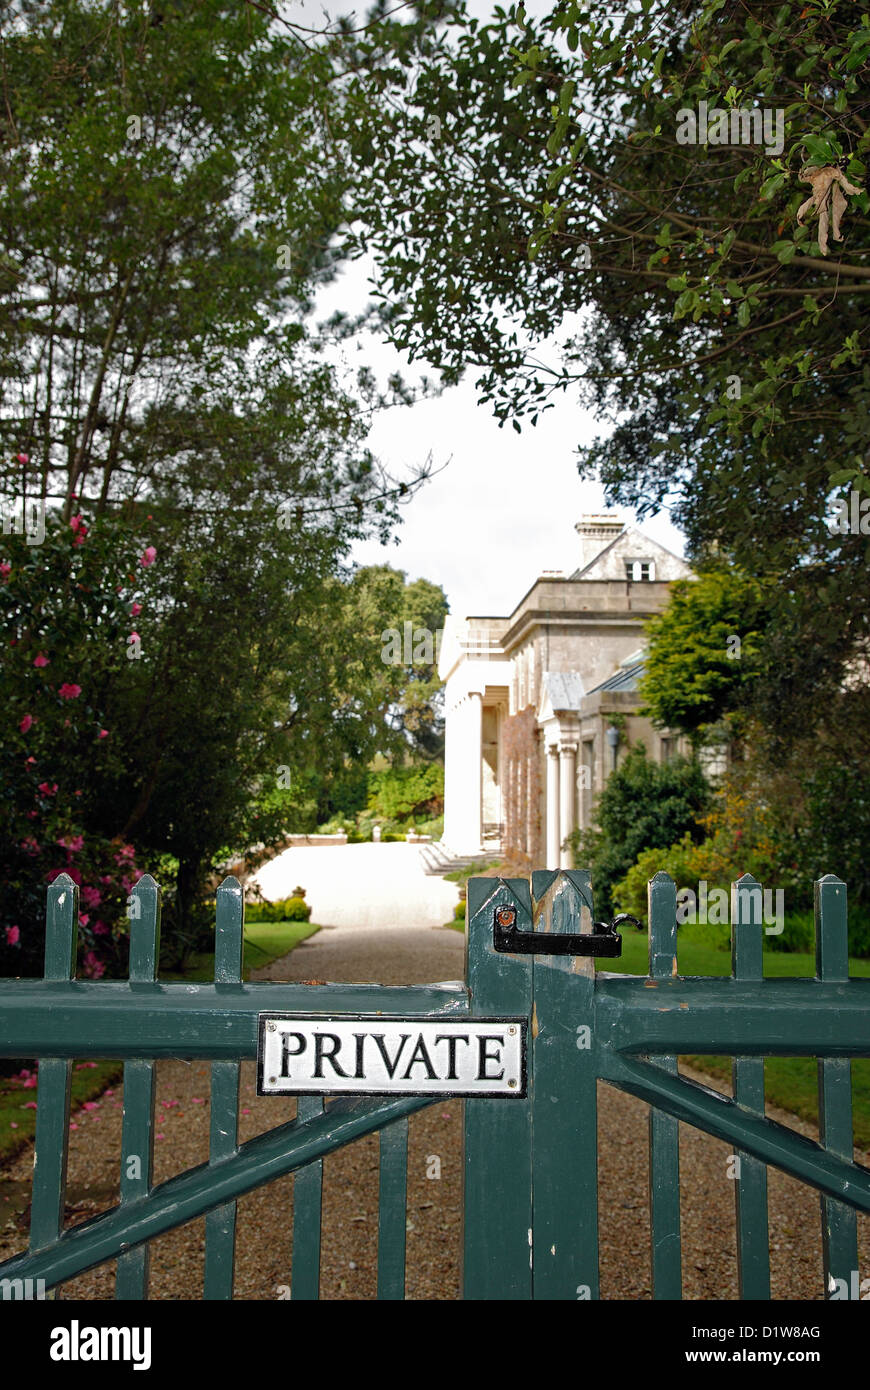 A private sign on the gate of a large house Stock Photo